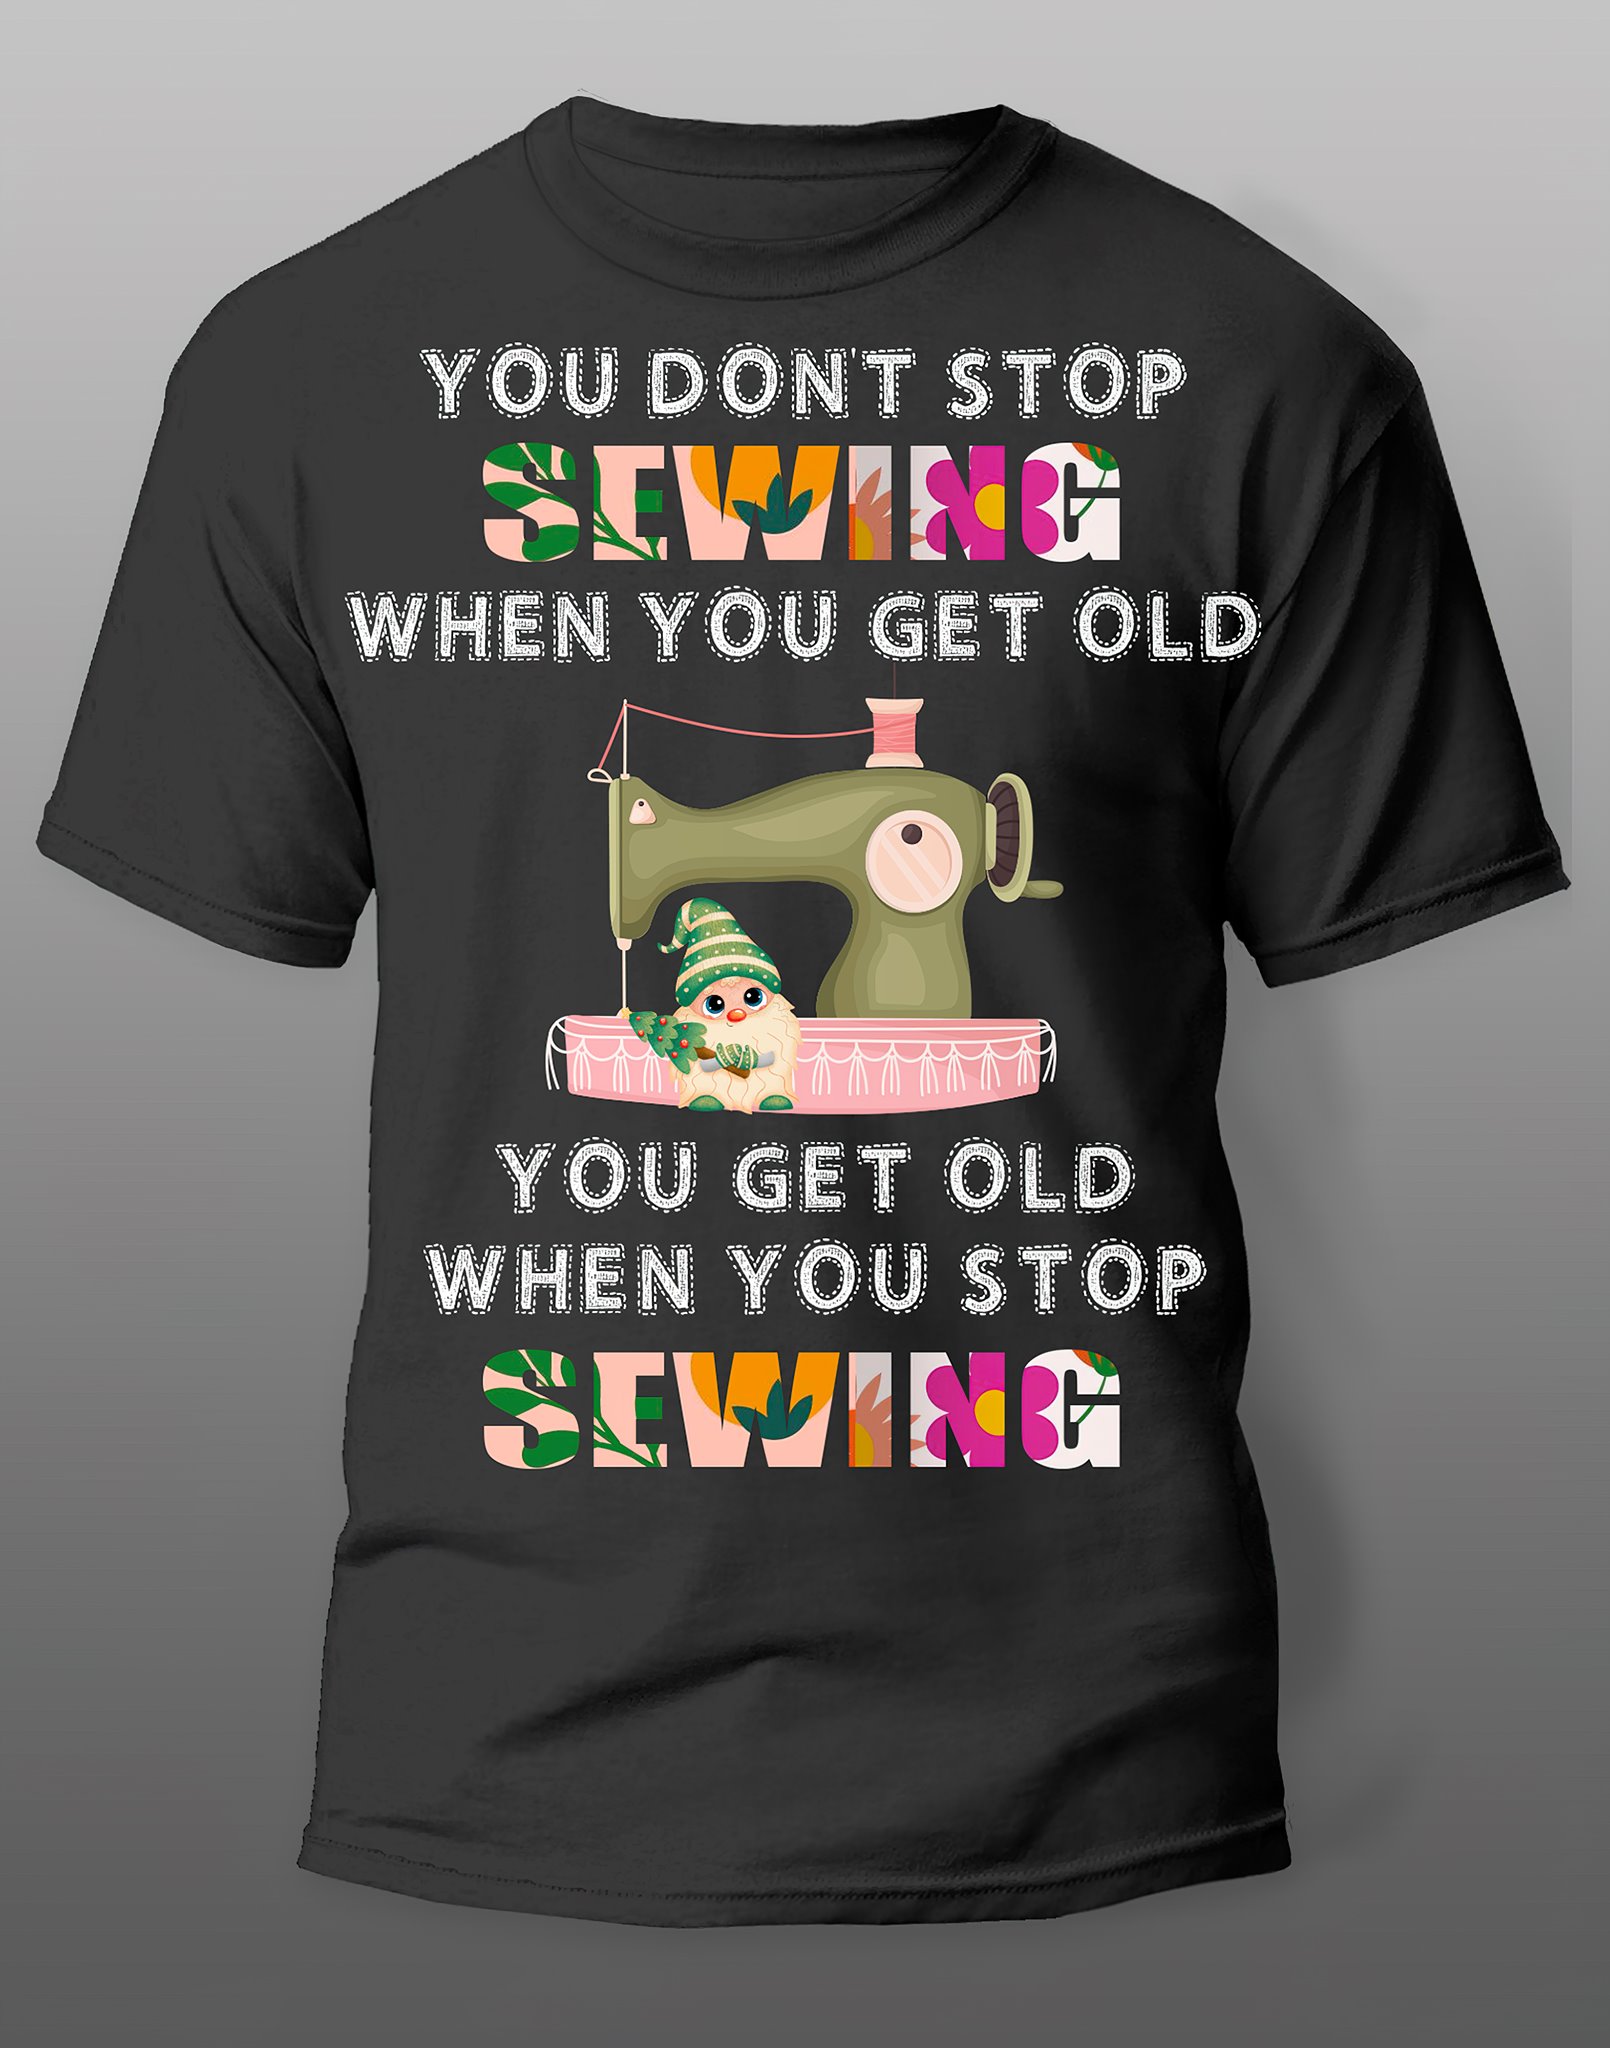 You don't stop sewing when you get old you get old when you stop sewing